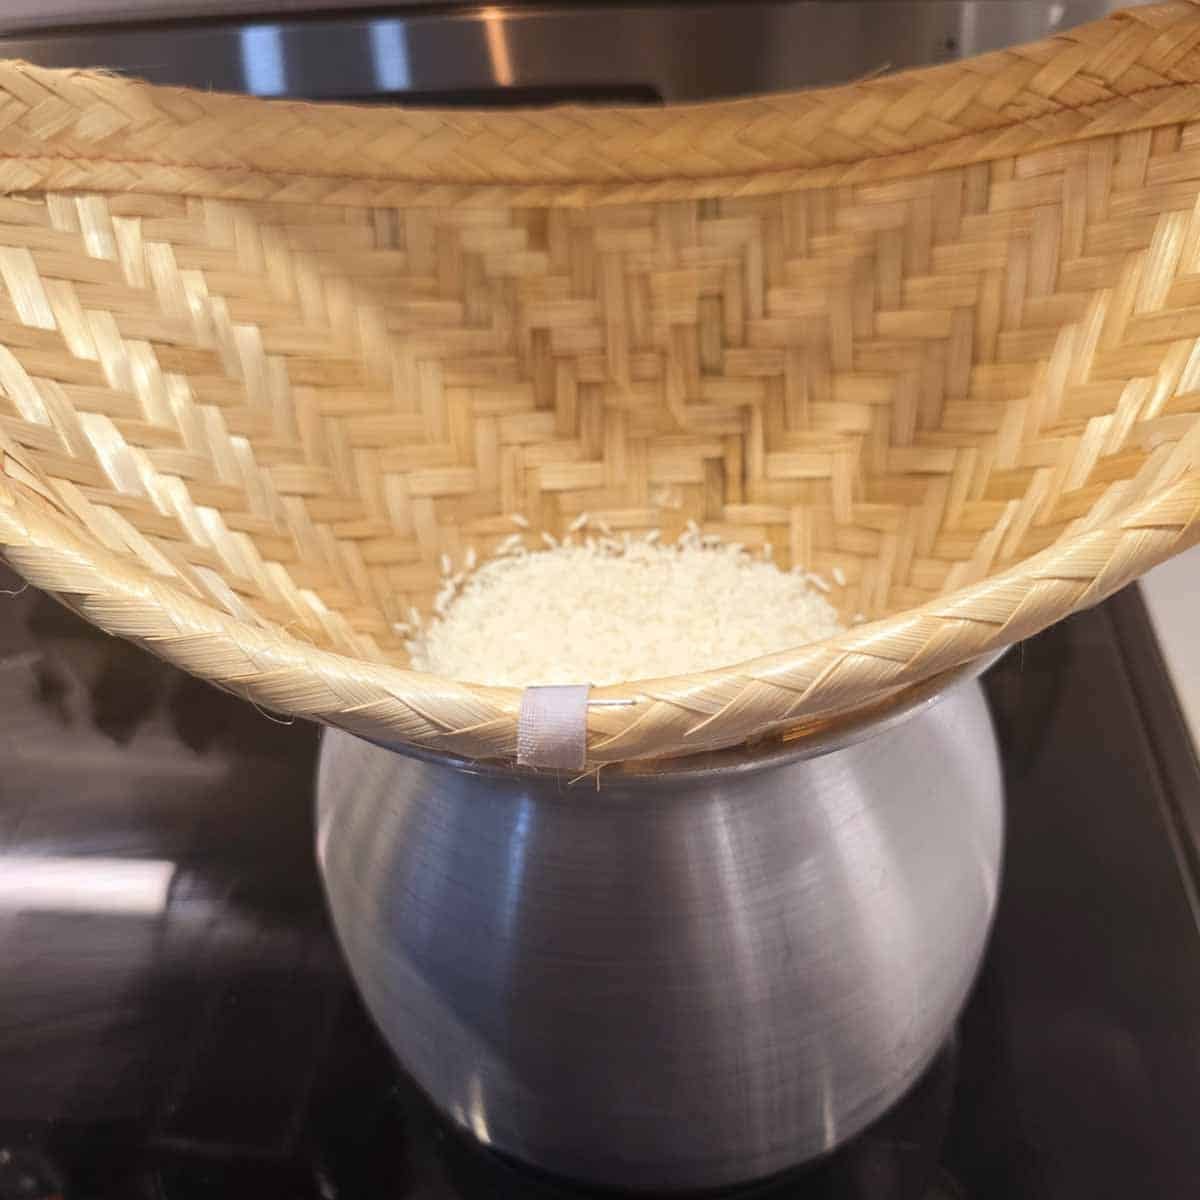 Sweet rice placed in a bamboo bowl over a steaming pot, ready for cooking.